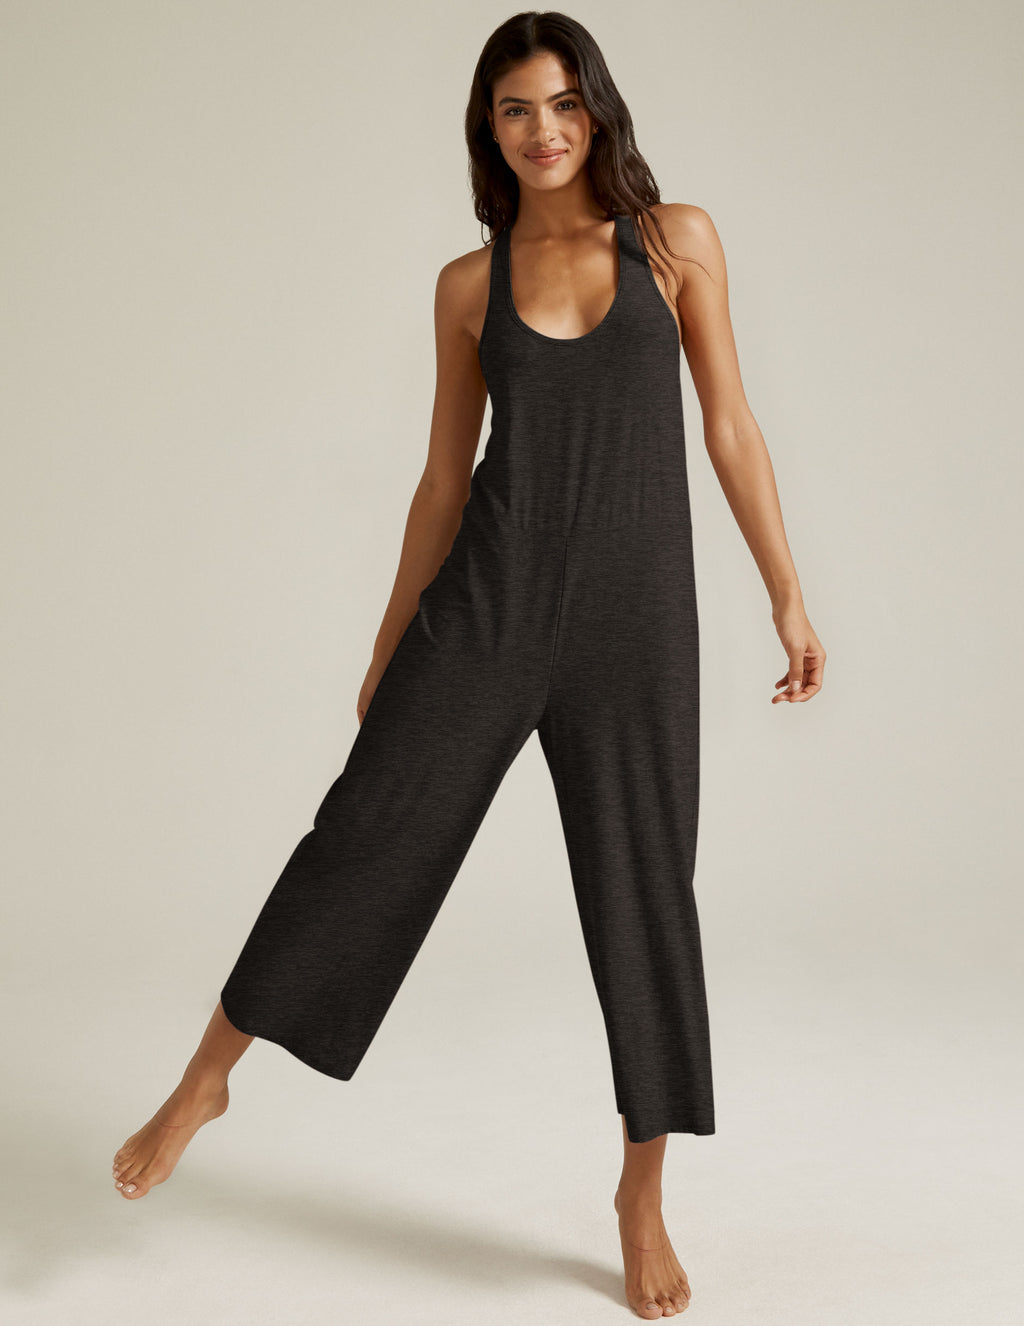 Dresses & Jumpsuits - The Softest All-In-One Outfits | Beyond Yoga